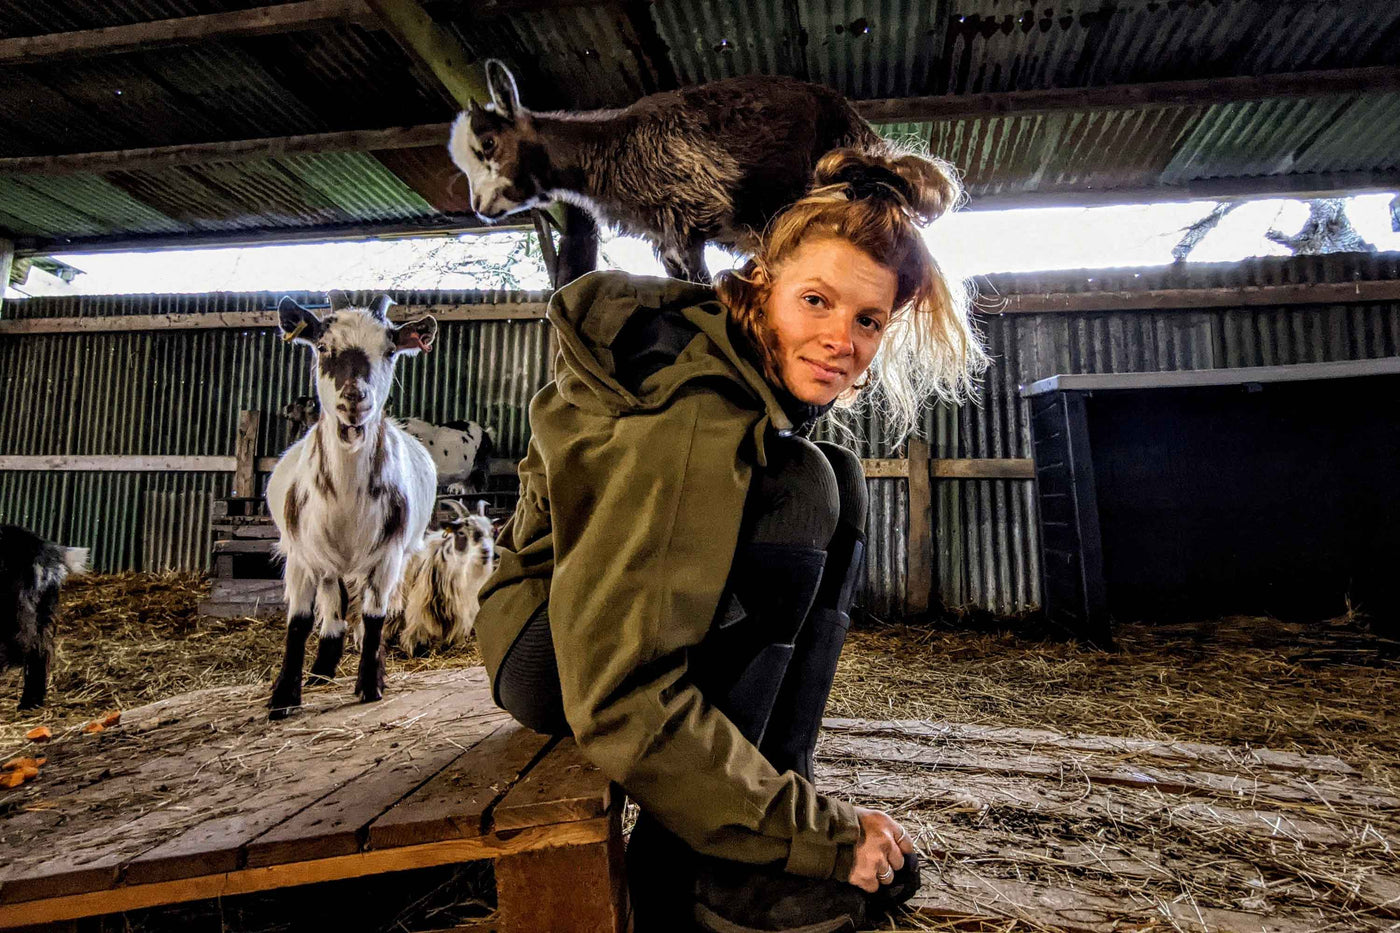 Zoë Colville sat on a wooden pallet in a barn, leaning over wearing a jacket and pair of Muck Boots with a goat stood on her back and others goats behind her